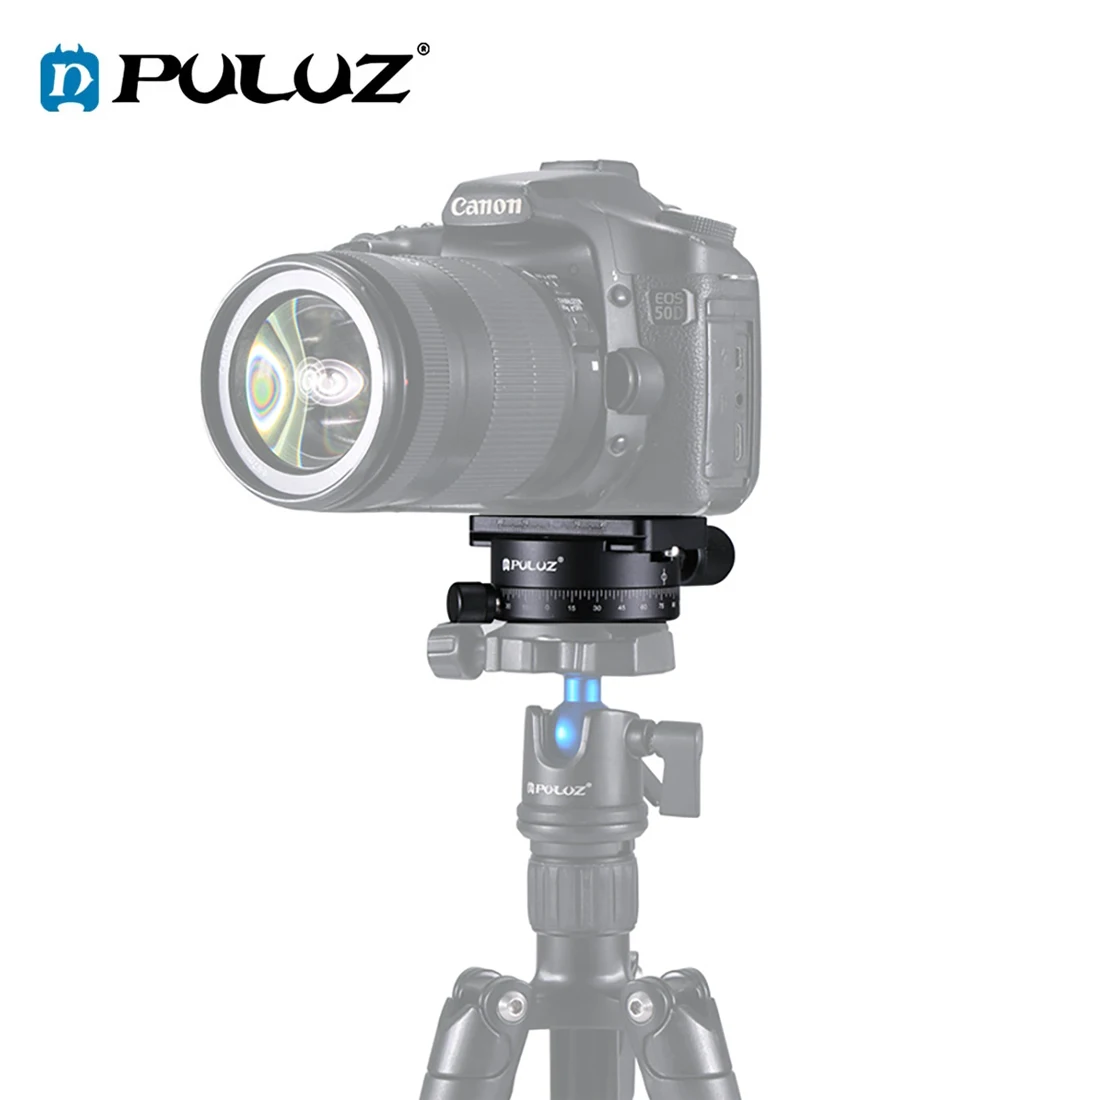 

PULUZ Aluminum Alloy 360 Degree Rotation Panoramic Head Tripod Head with 1/4 Screw Quick Release Plate for DSLR Cameras Tripod